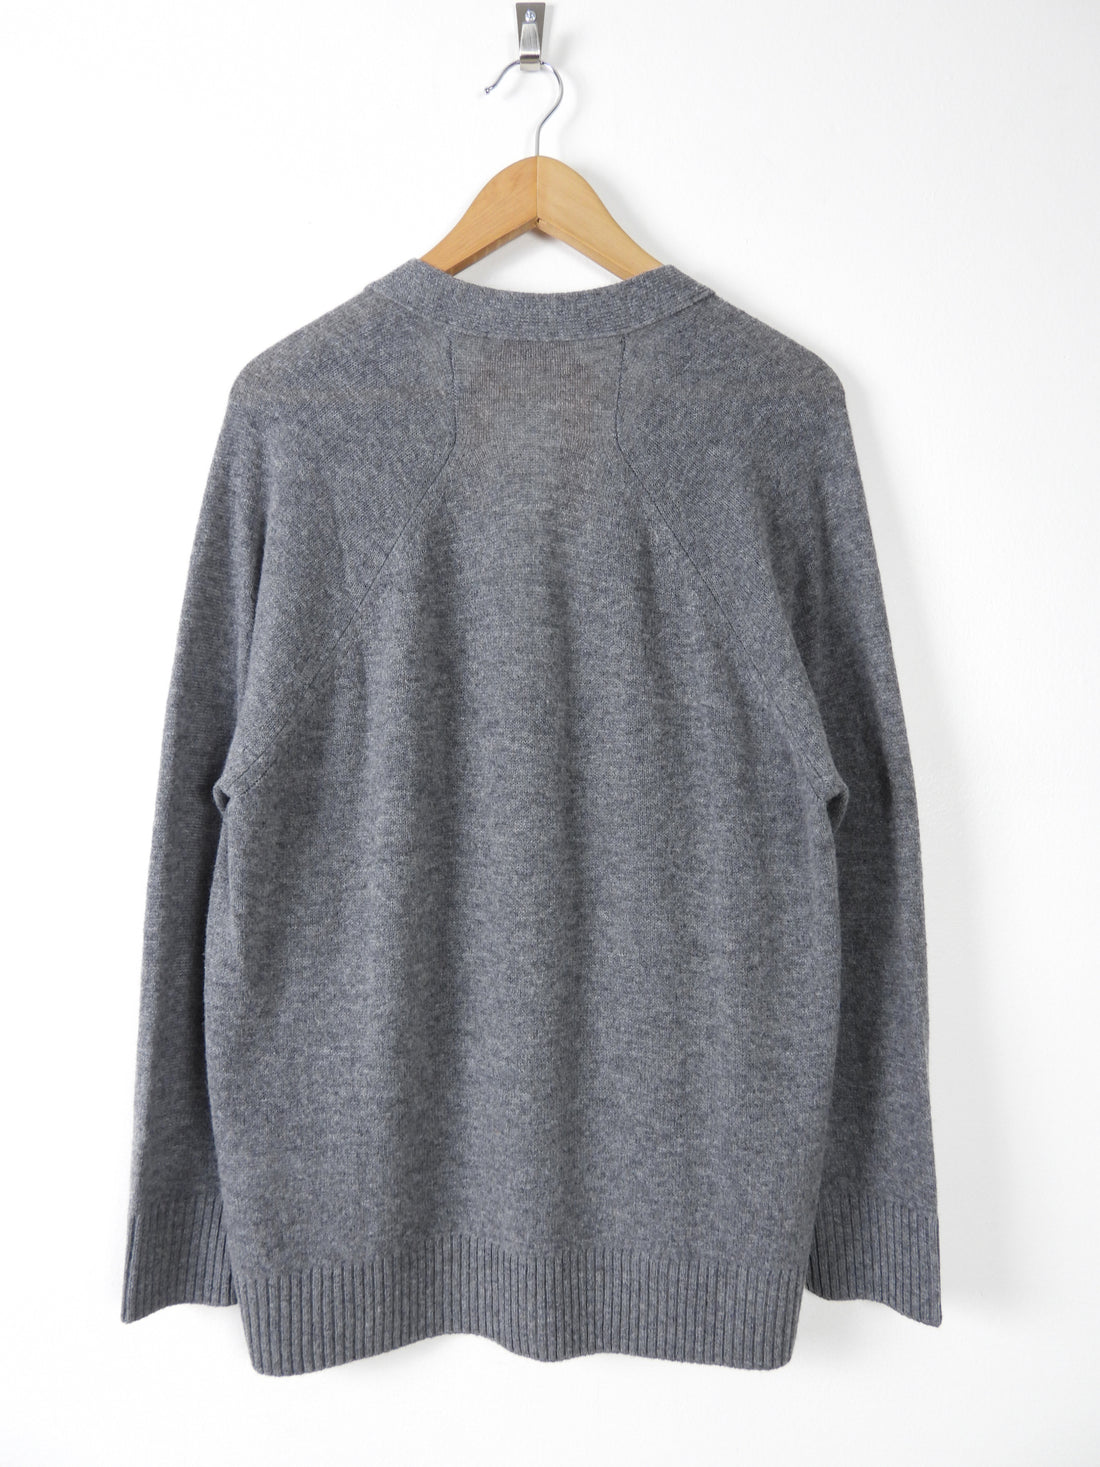 No. 21 Grey Wool and Cashmere Jewel Button Cardigan - S / M